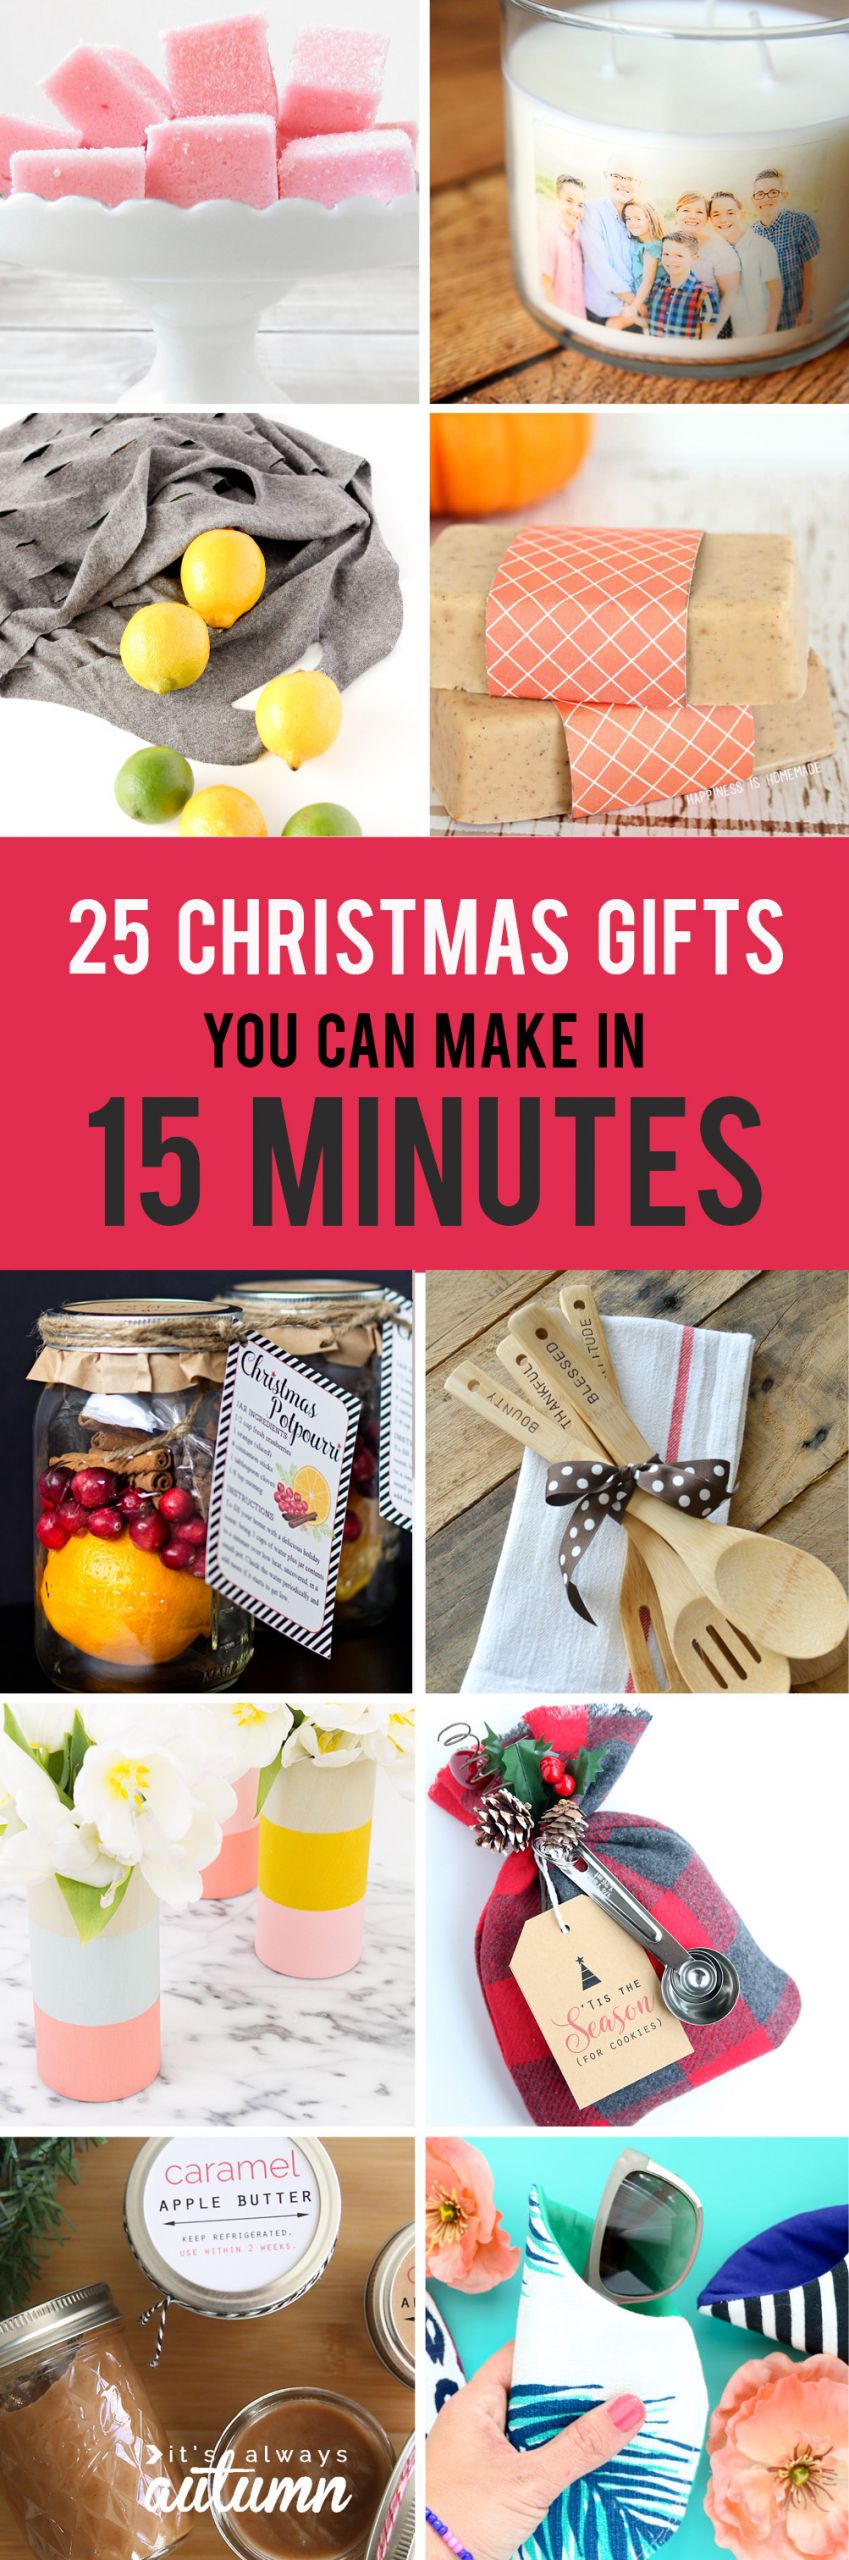 Easy DIY Gifts
 25 easy homemade Christmas ts you can make in 15